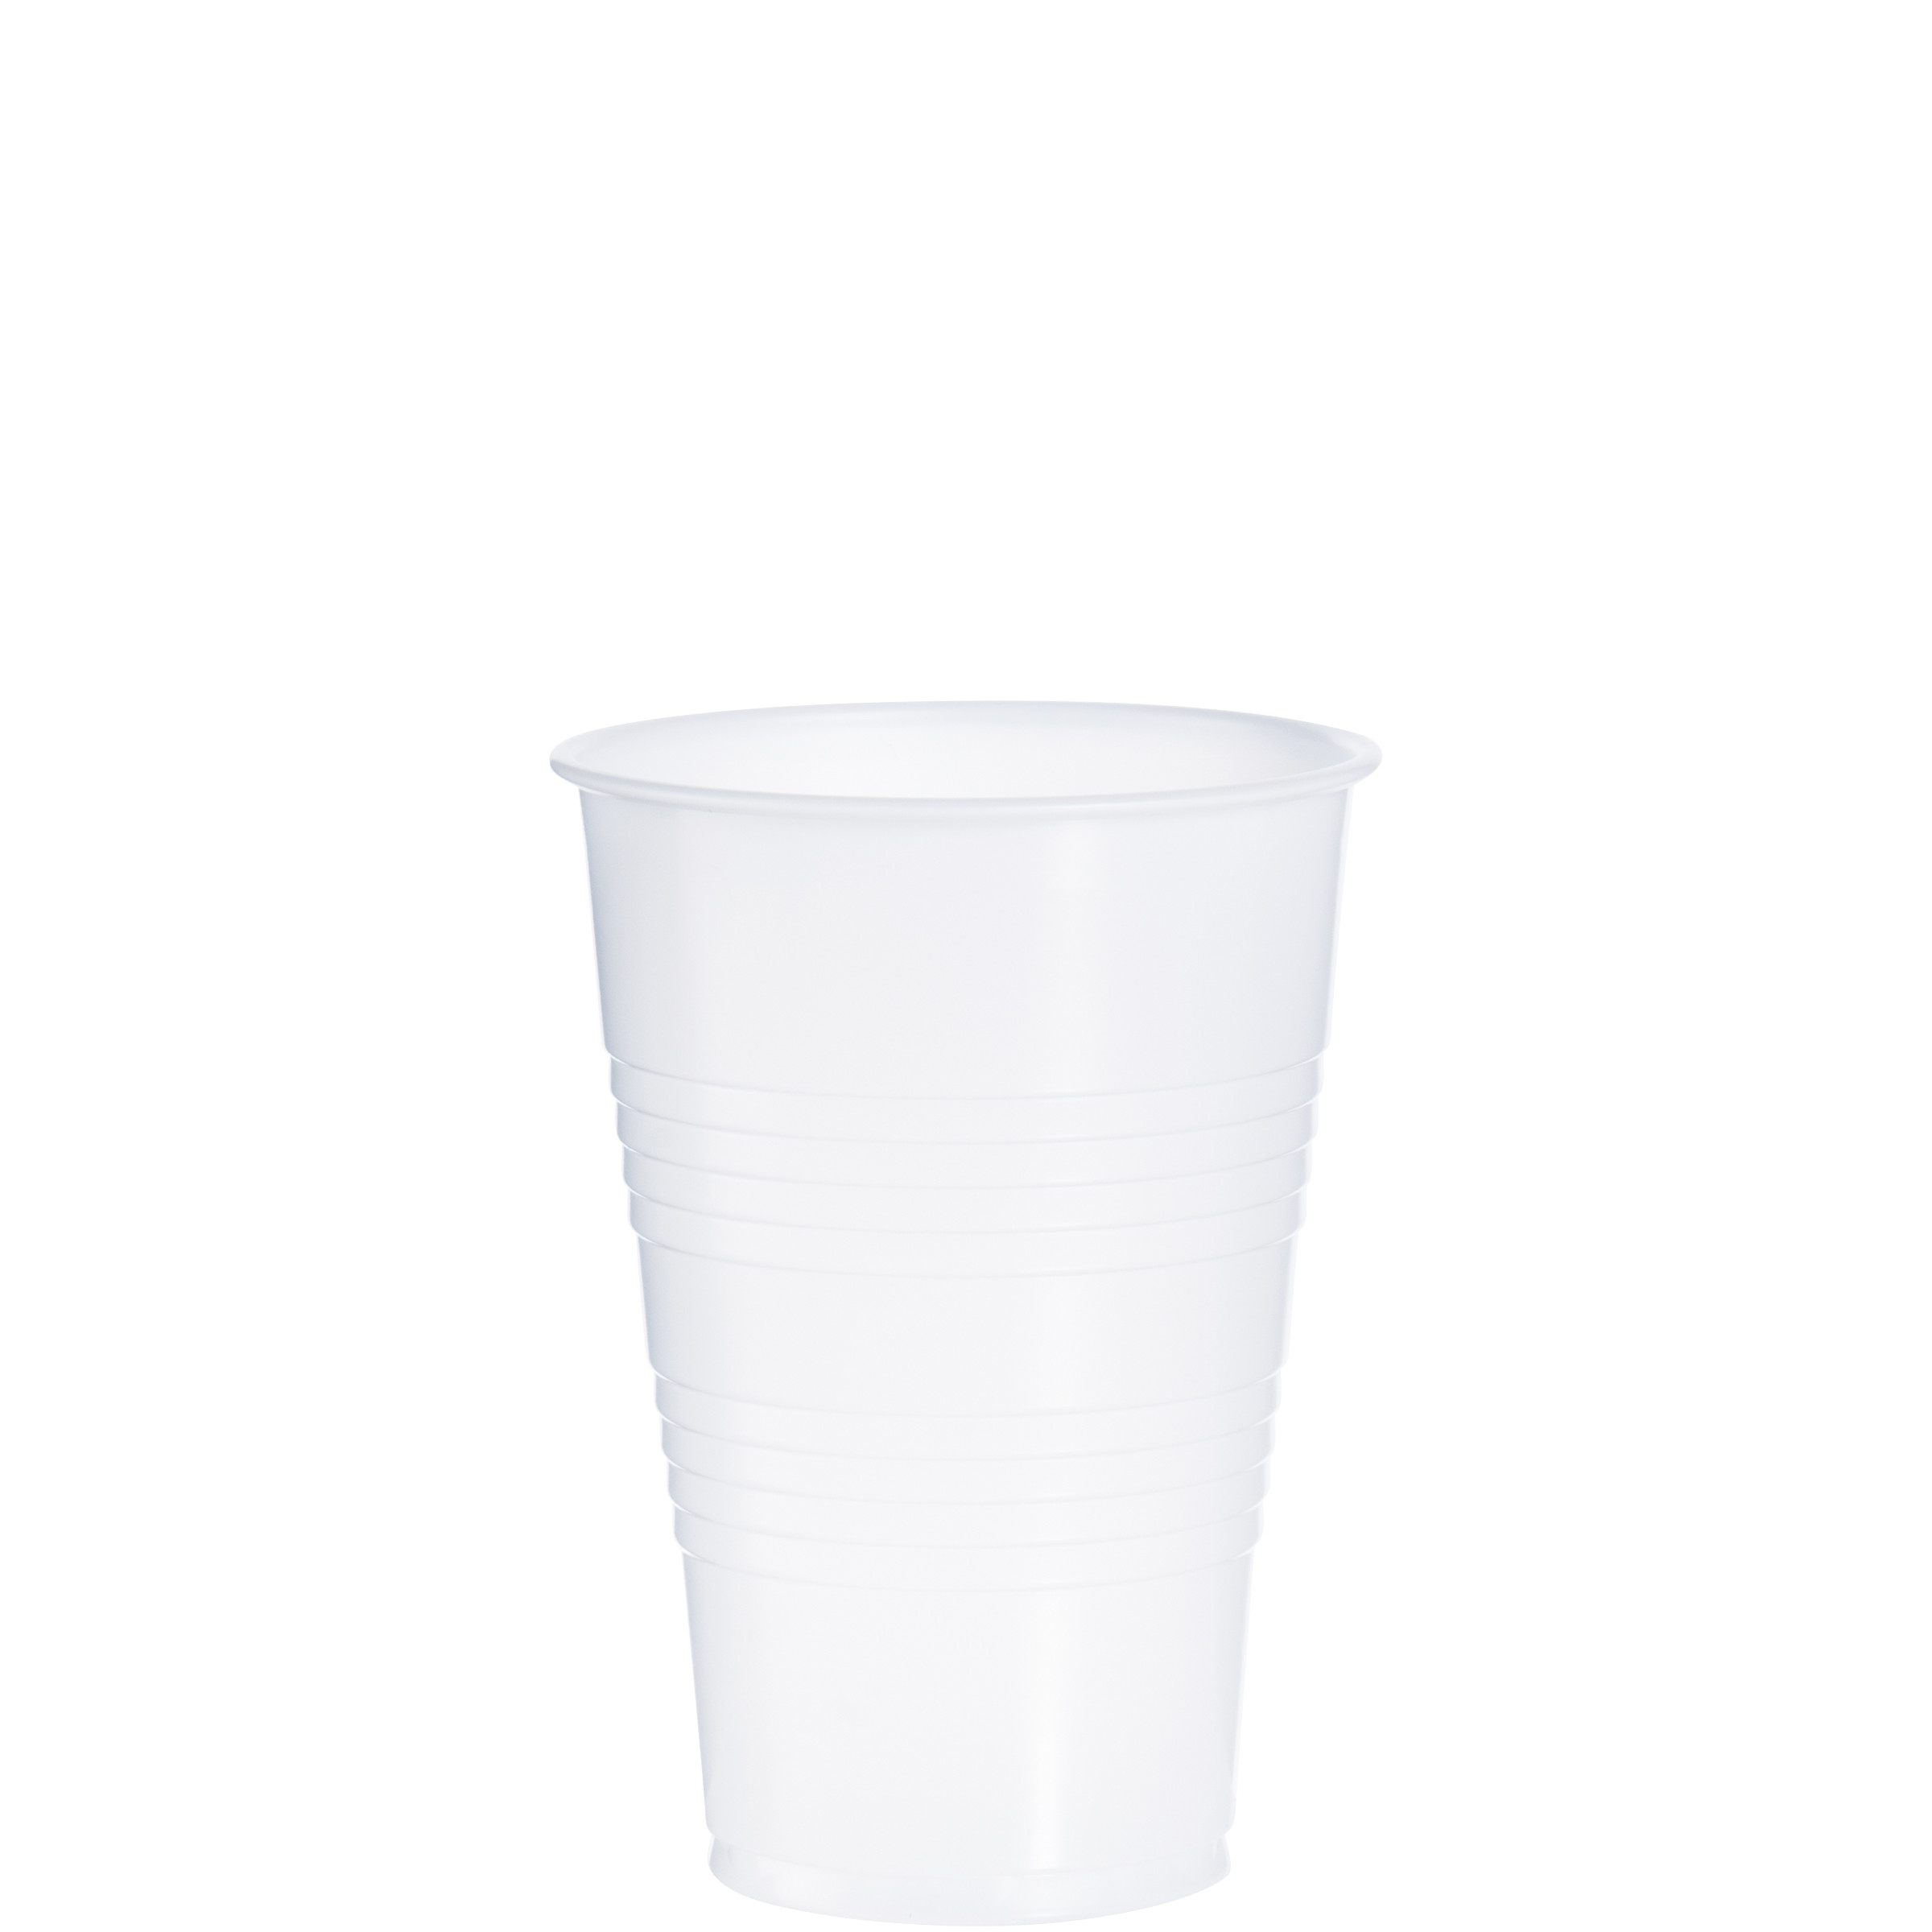 PLASTIC CUP 16PX CLEAR